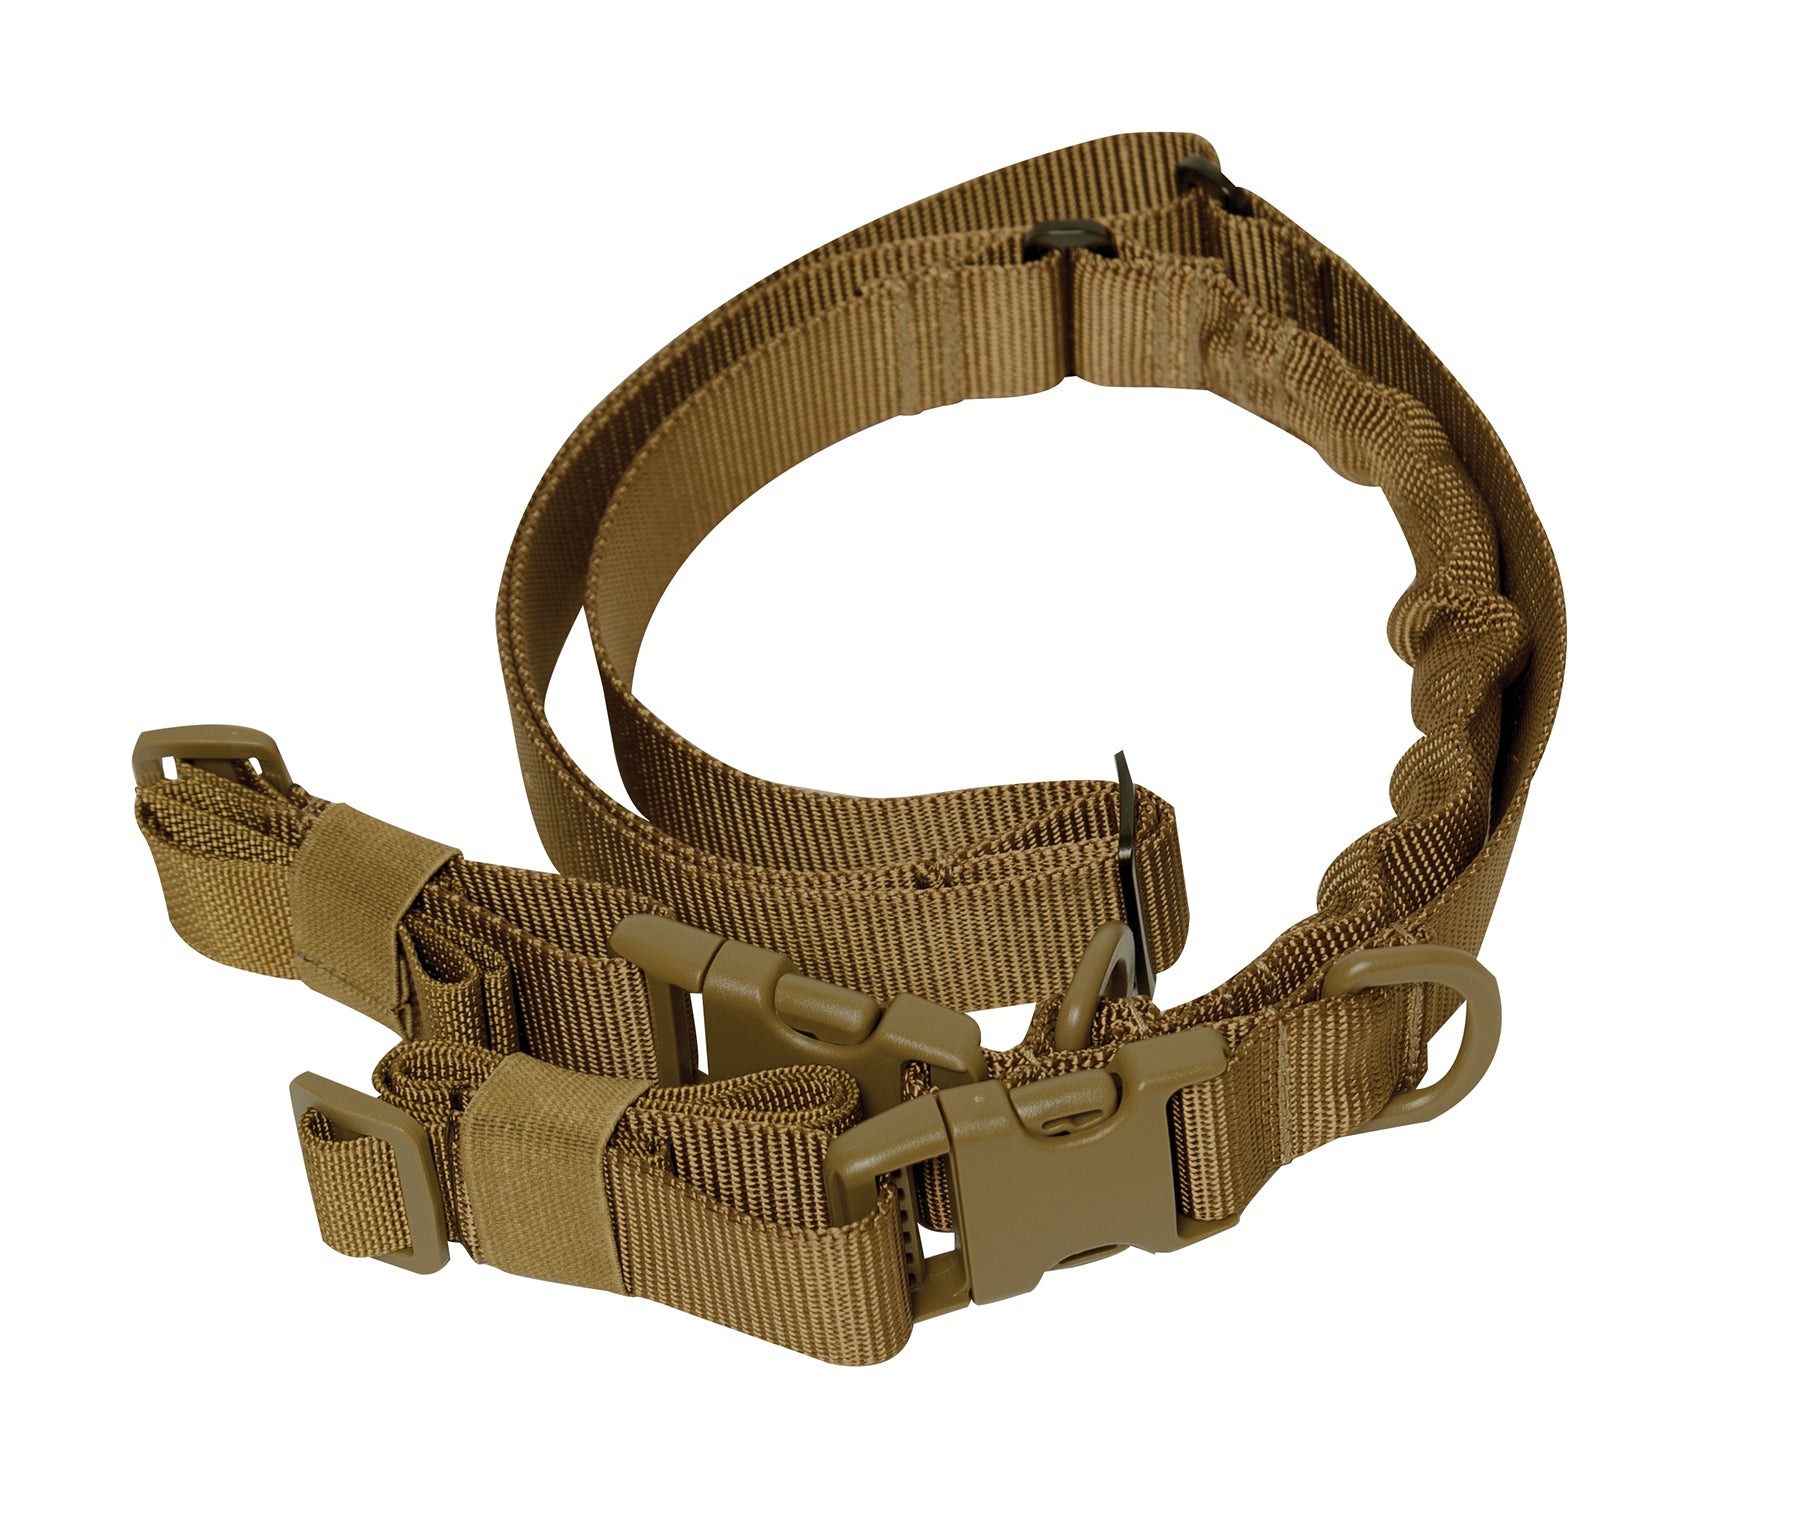 Rothco Deluxe Tactical 2-Point Sling